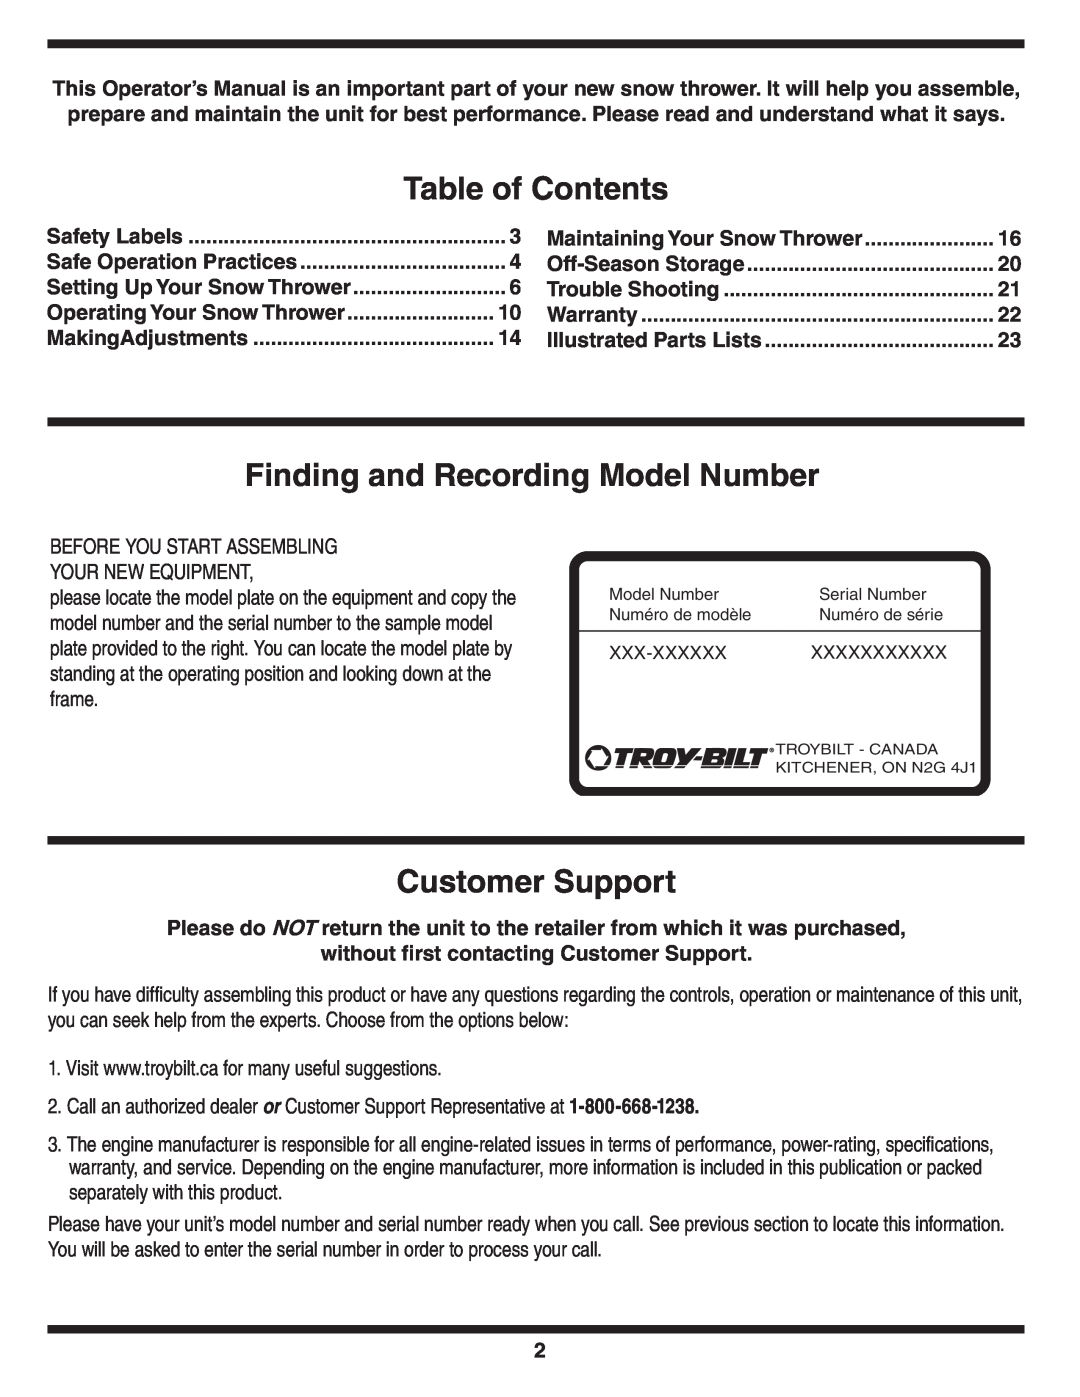 Troy-Bilt 769-03251 warranty Table of Contents, Finding and Recording Model Number, Customer Support 